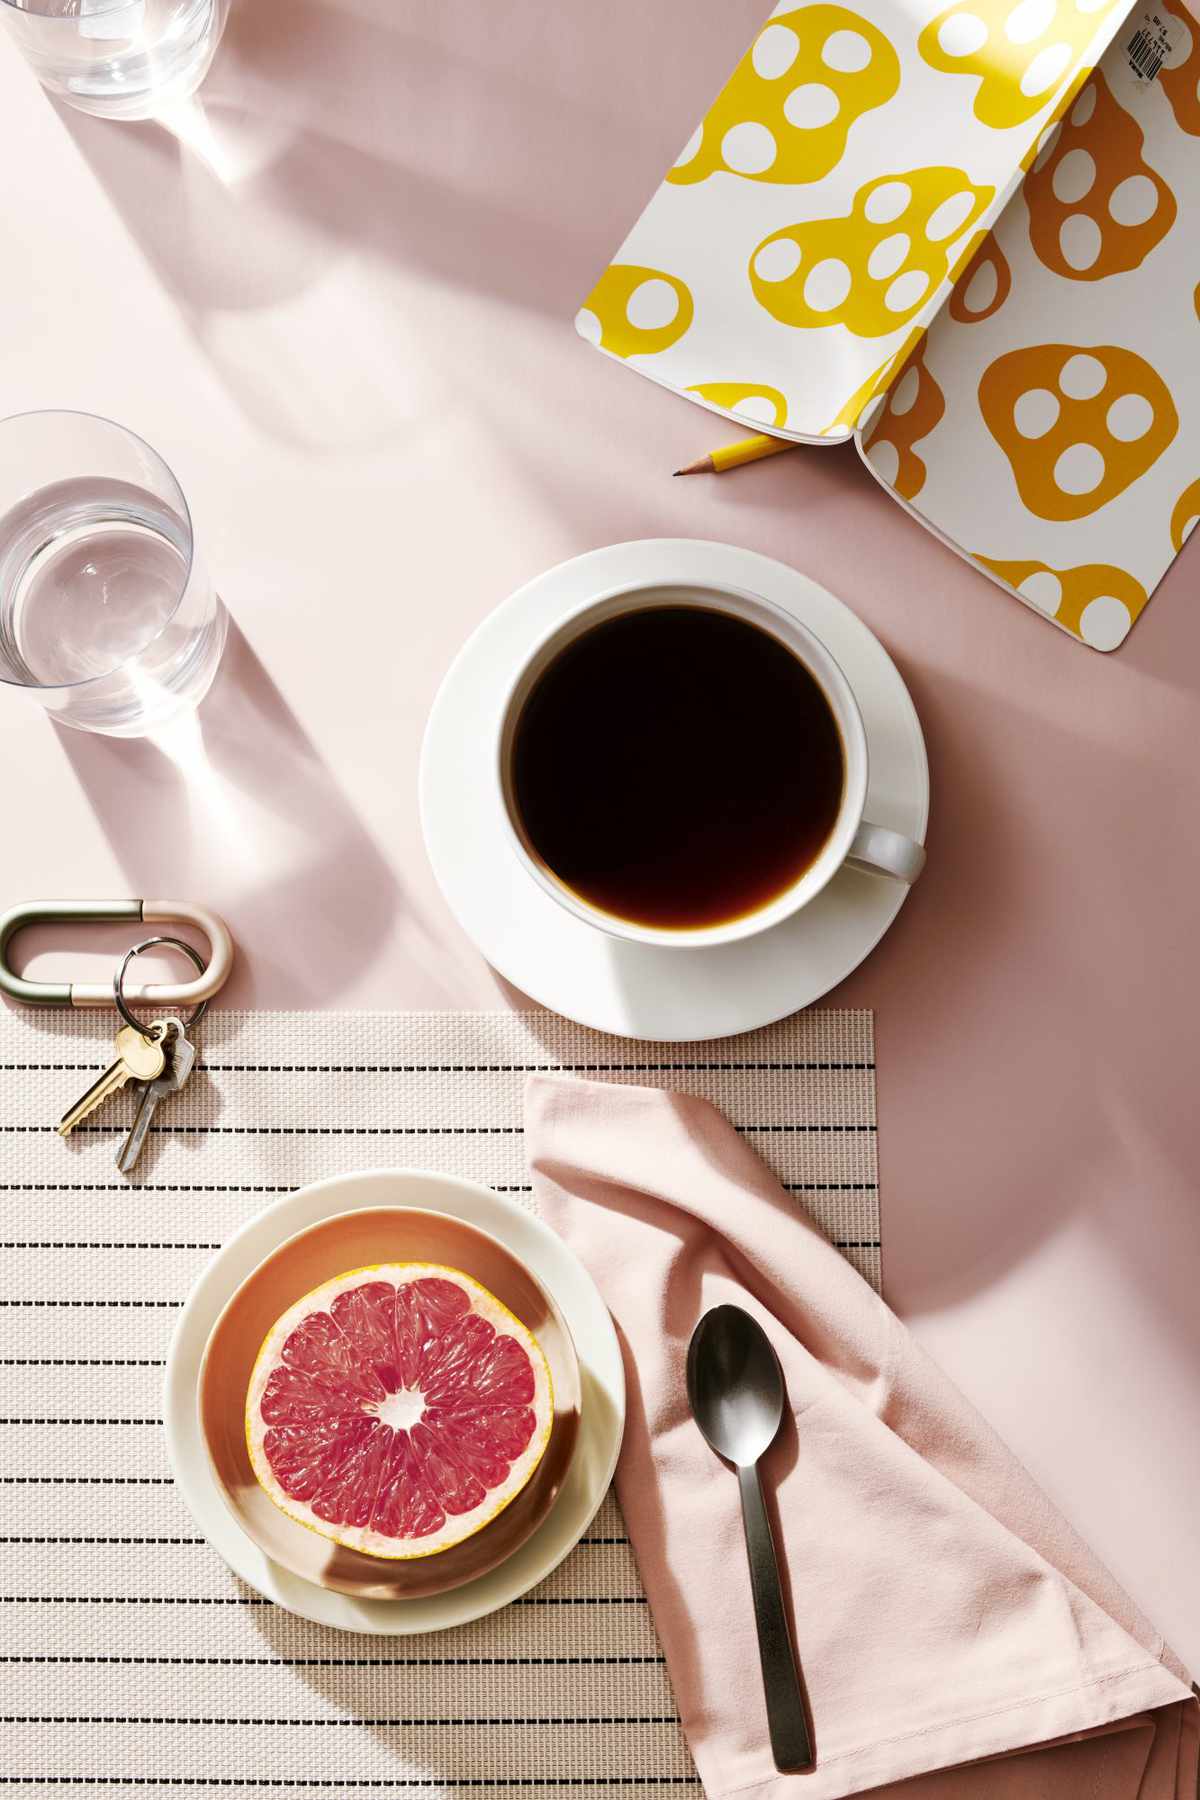 Rise and Shine morning person sleep coffee grapefruit still life health rest relax stress woman women busy